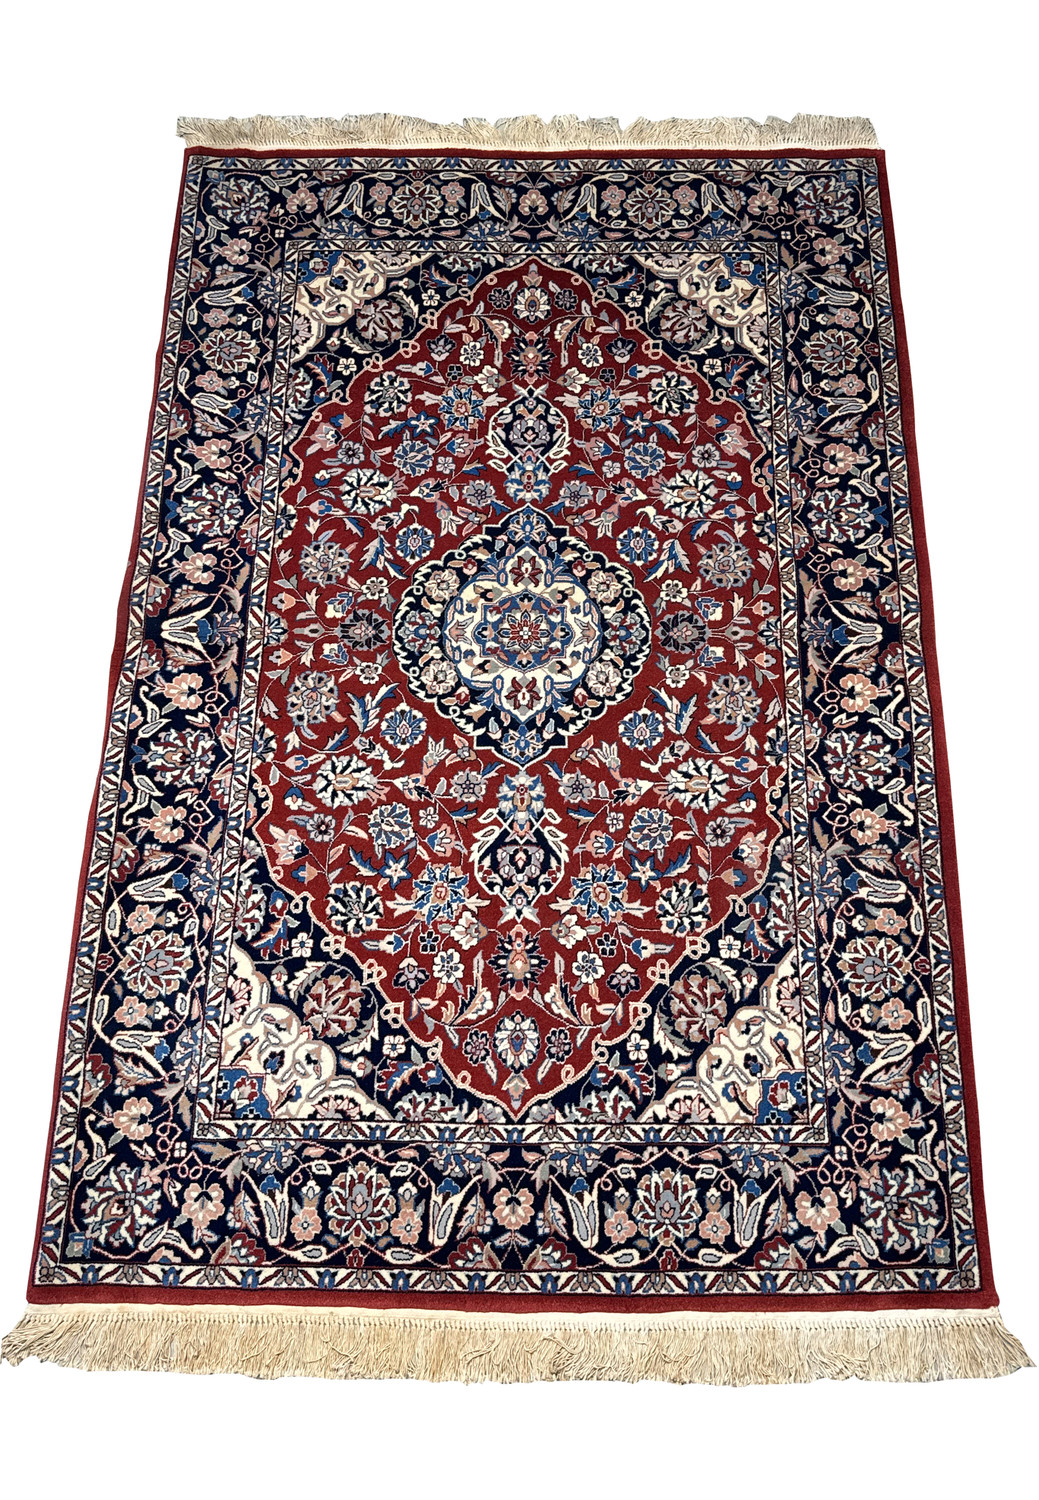 Full view of  4 x6 handmade Persian Isfahan wool and silk rug with traditional design and fringed edge